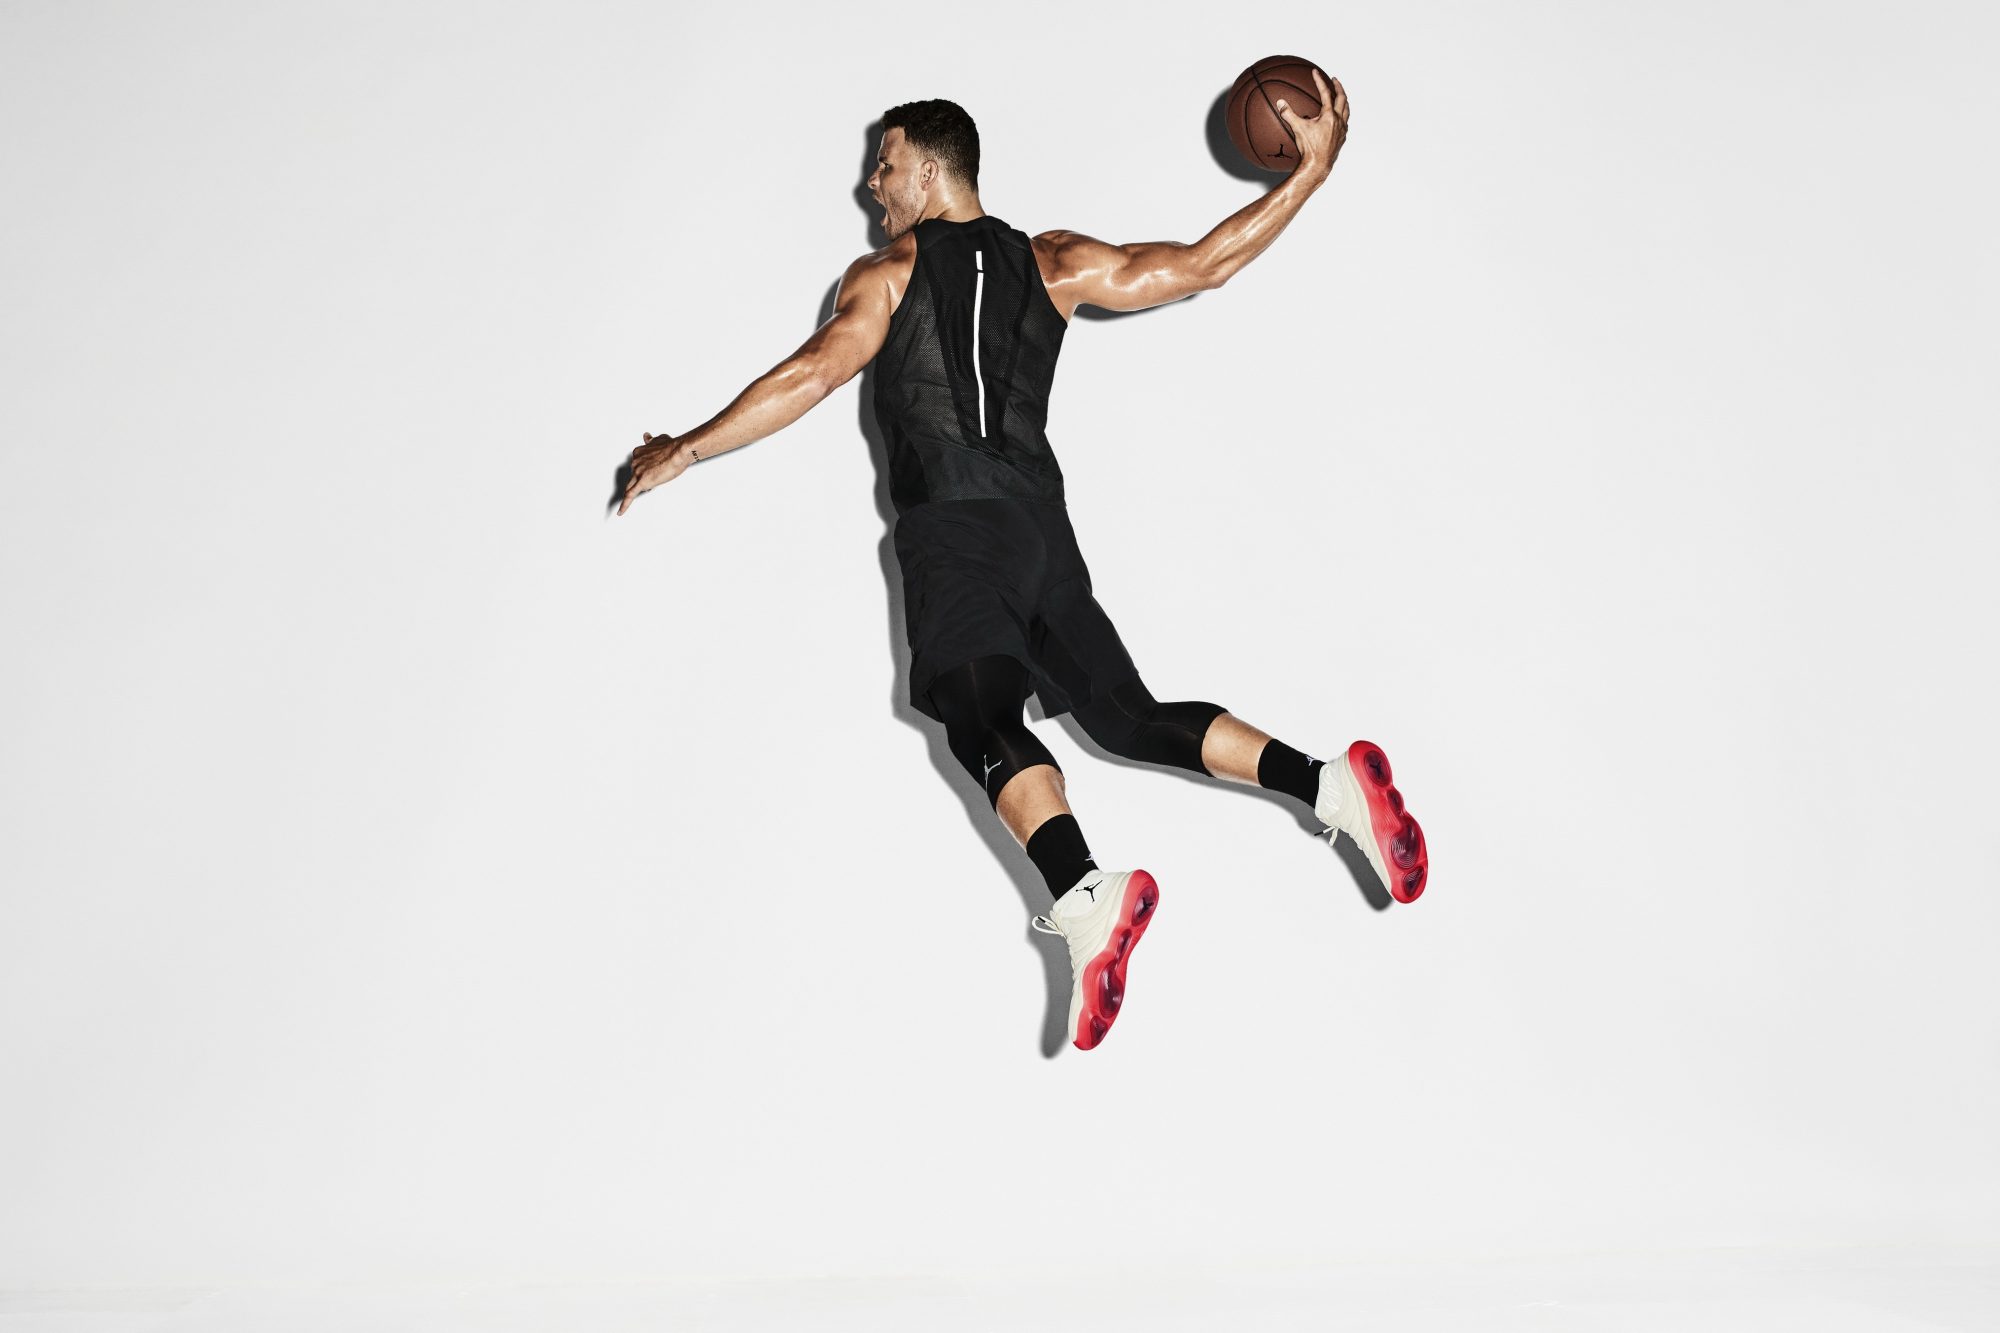 blake griffin superfly 2017